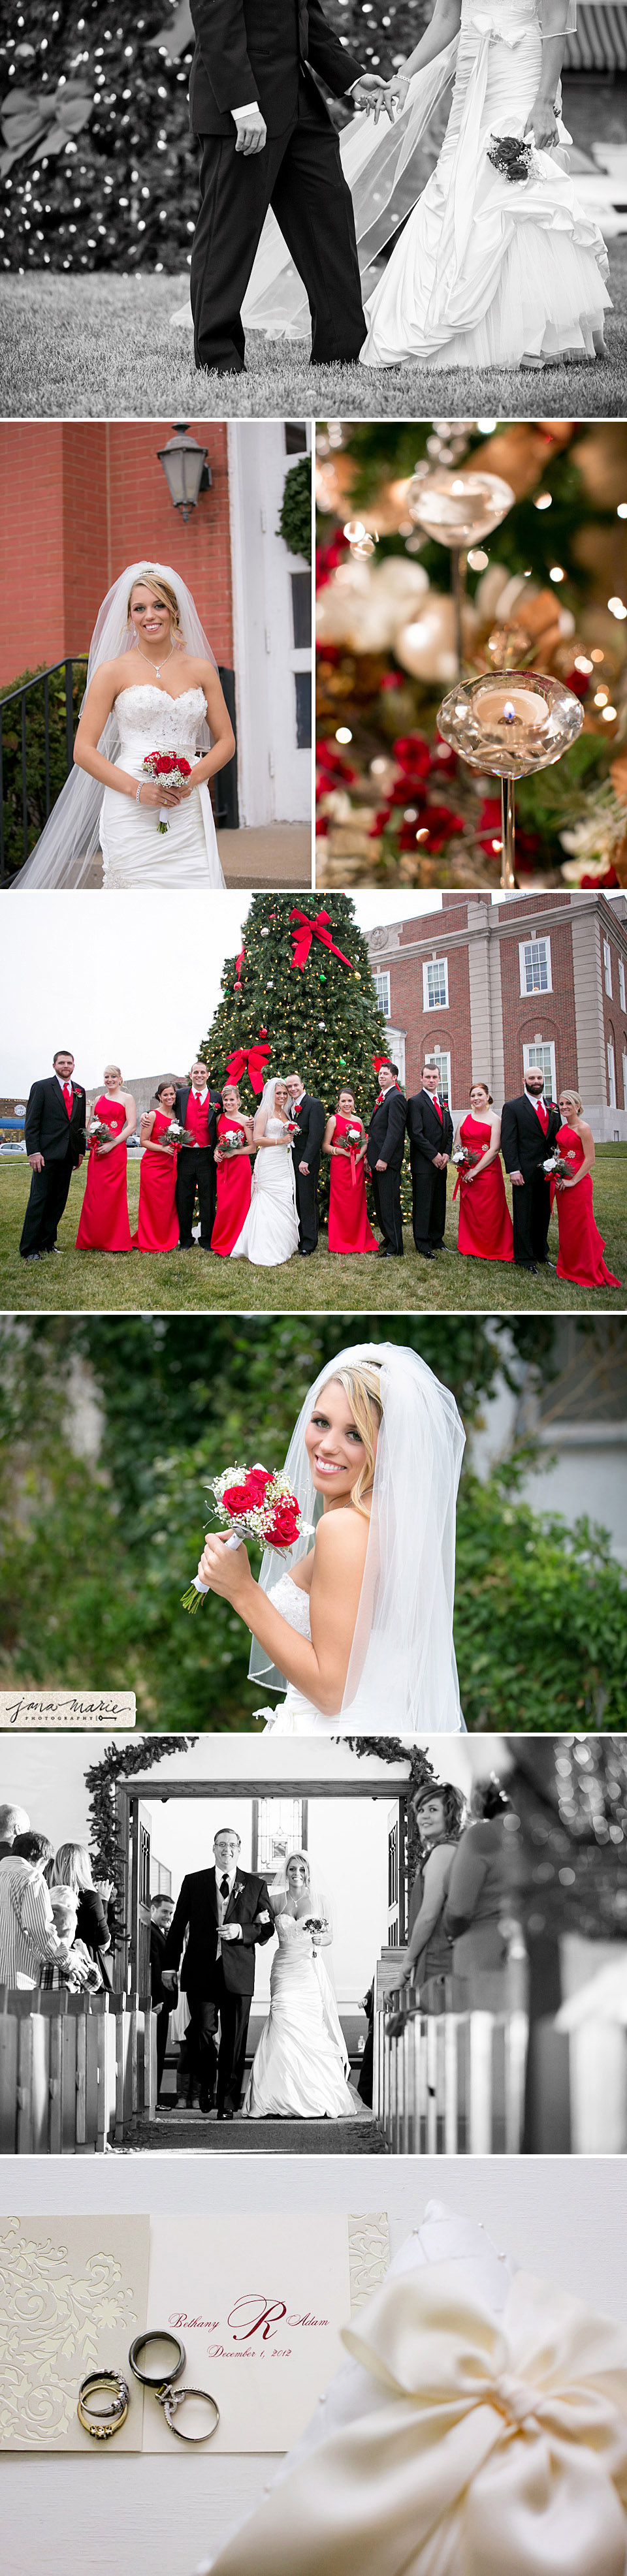 KC wedding photography, Jana Marler, Bethany Bray, Independence square, bride, couple pictures